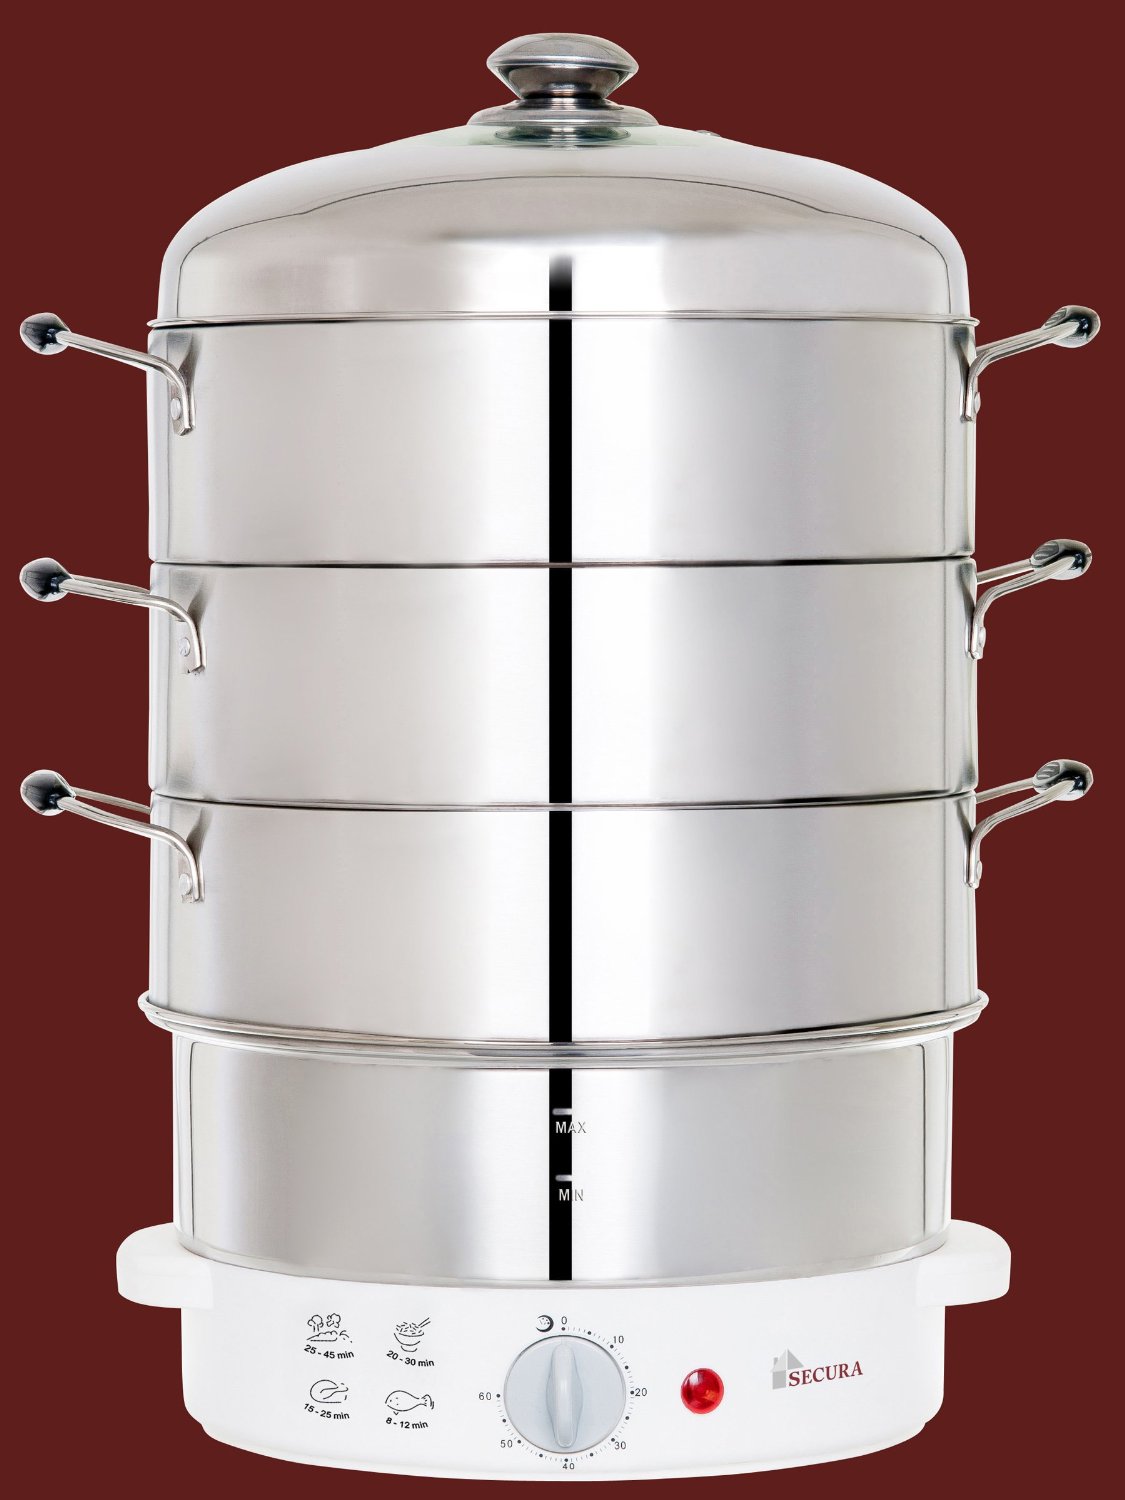 Secura 3-Tier Stainless Steel Food Steamer 6-9 quarts Rice Cooker, w